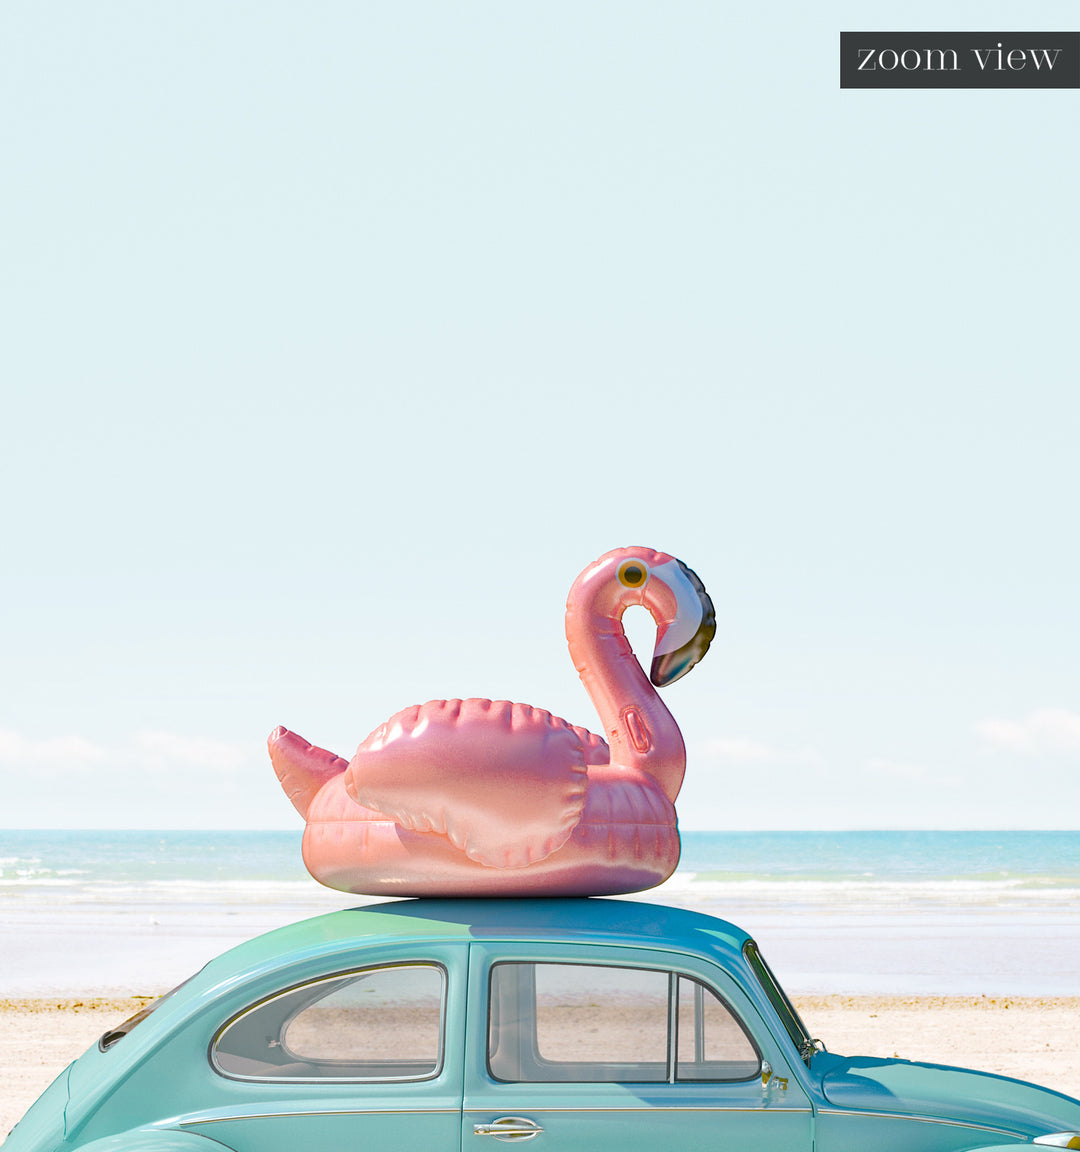 A Beetle and a Flamingo at the Beach